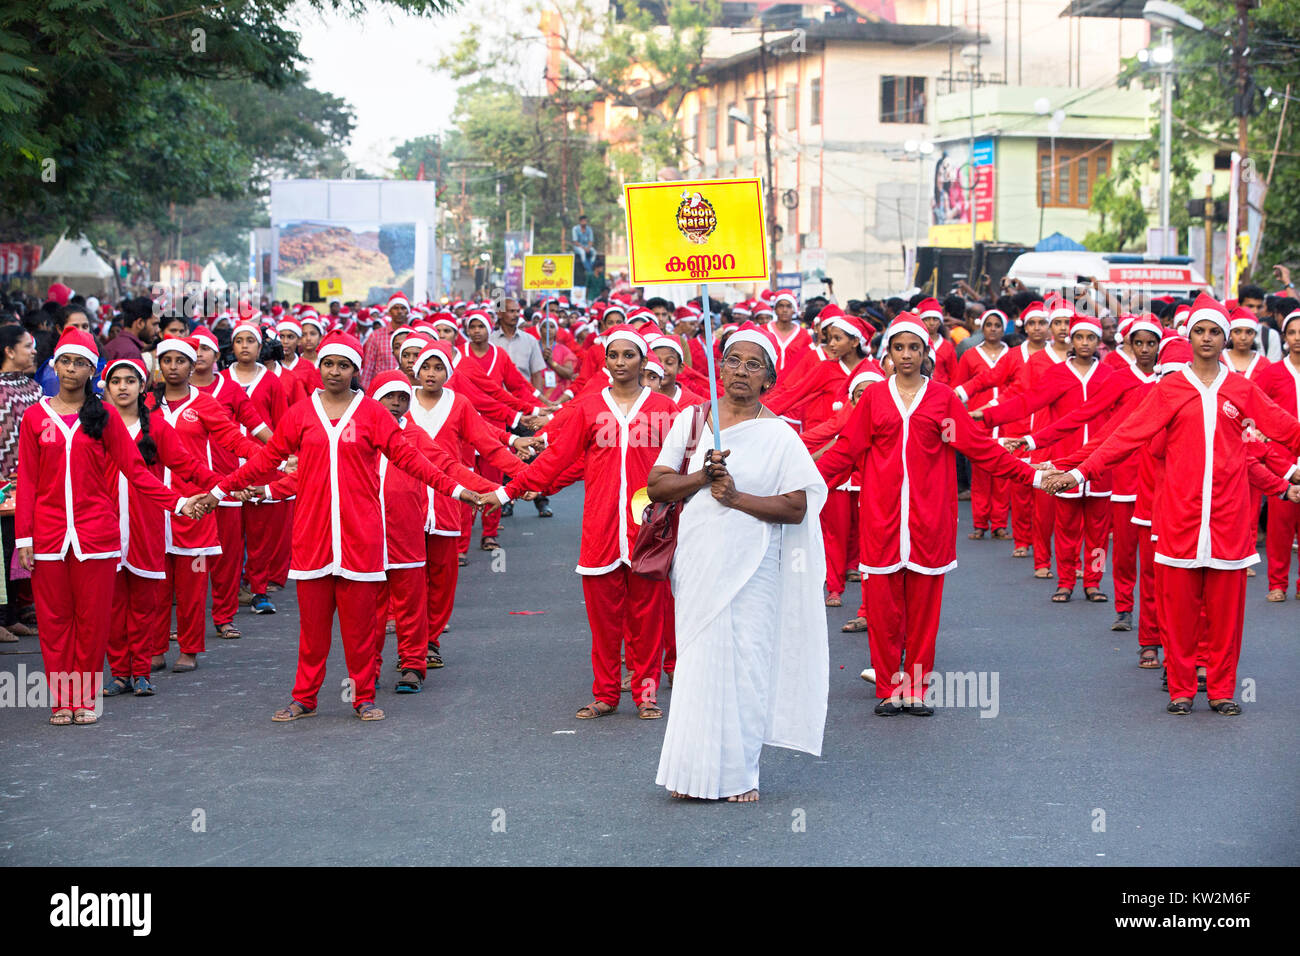 Buon Natale Kerala.Buon Natale The Christmas Celebration Of Thrissur Archdiocese Will Stock Photo Alamy